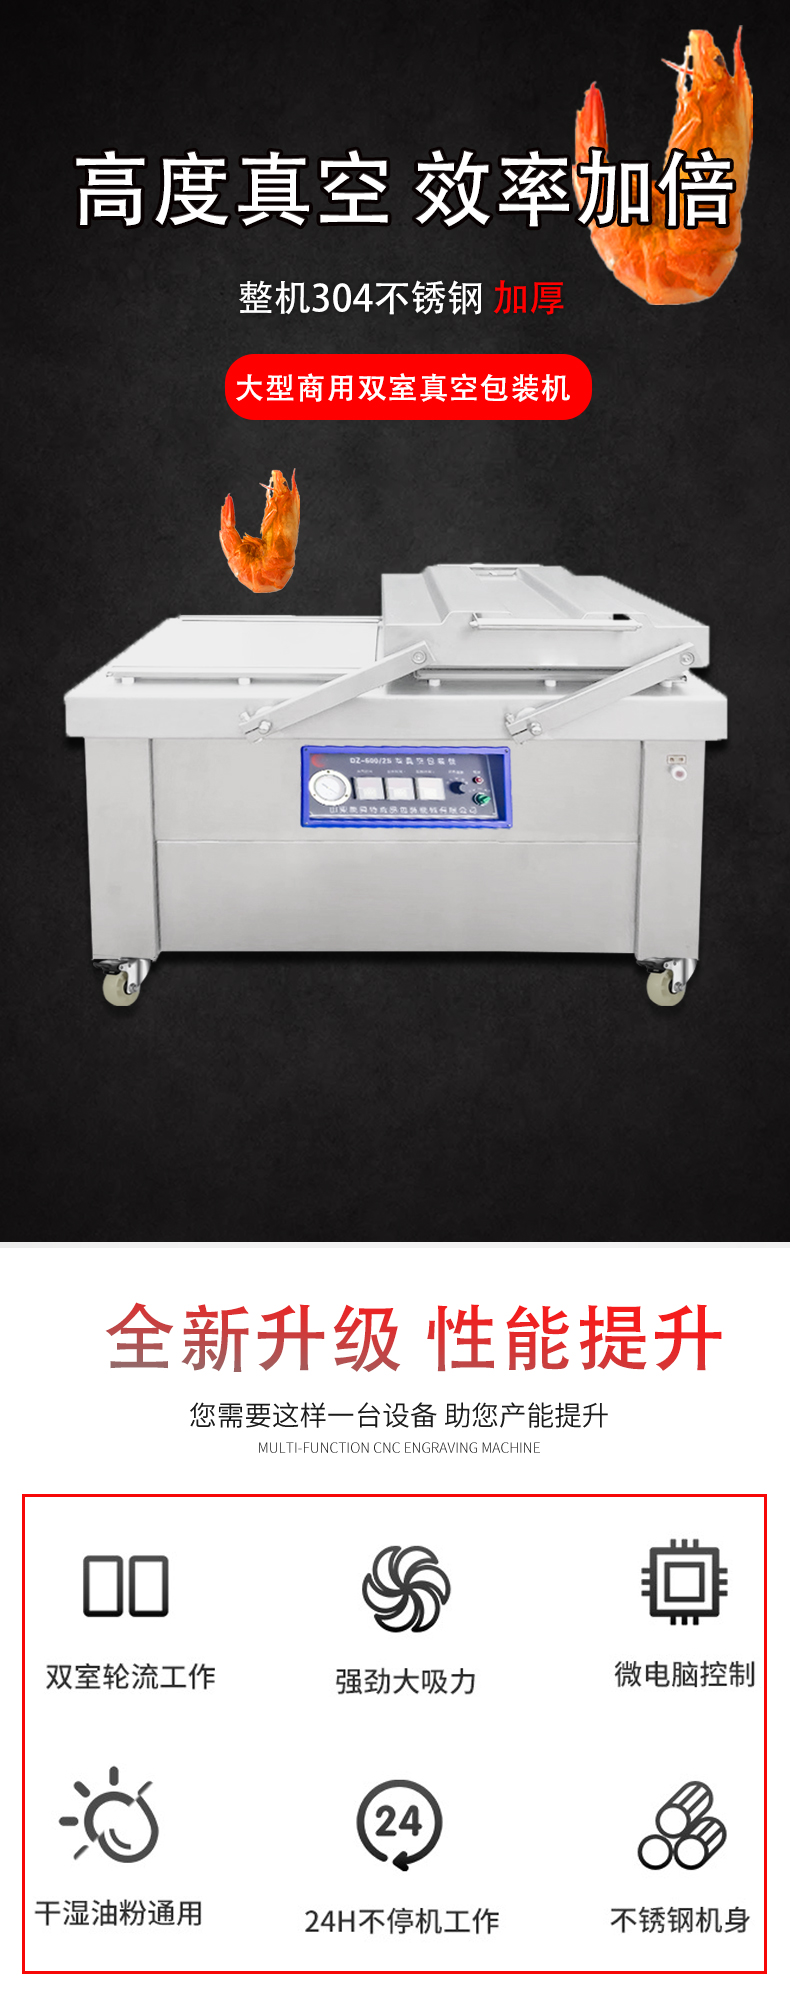 Kangbeite Brand Seafood Vacuum packing Equipment Spot 600 Double chamber Freeze drying Seafood Vacuum packing Machine